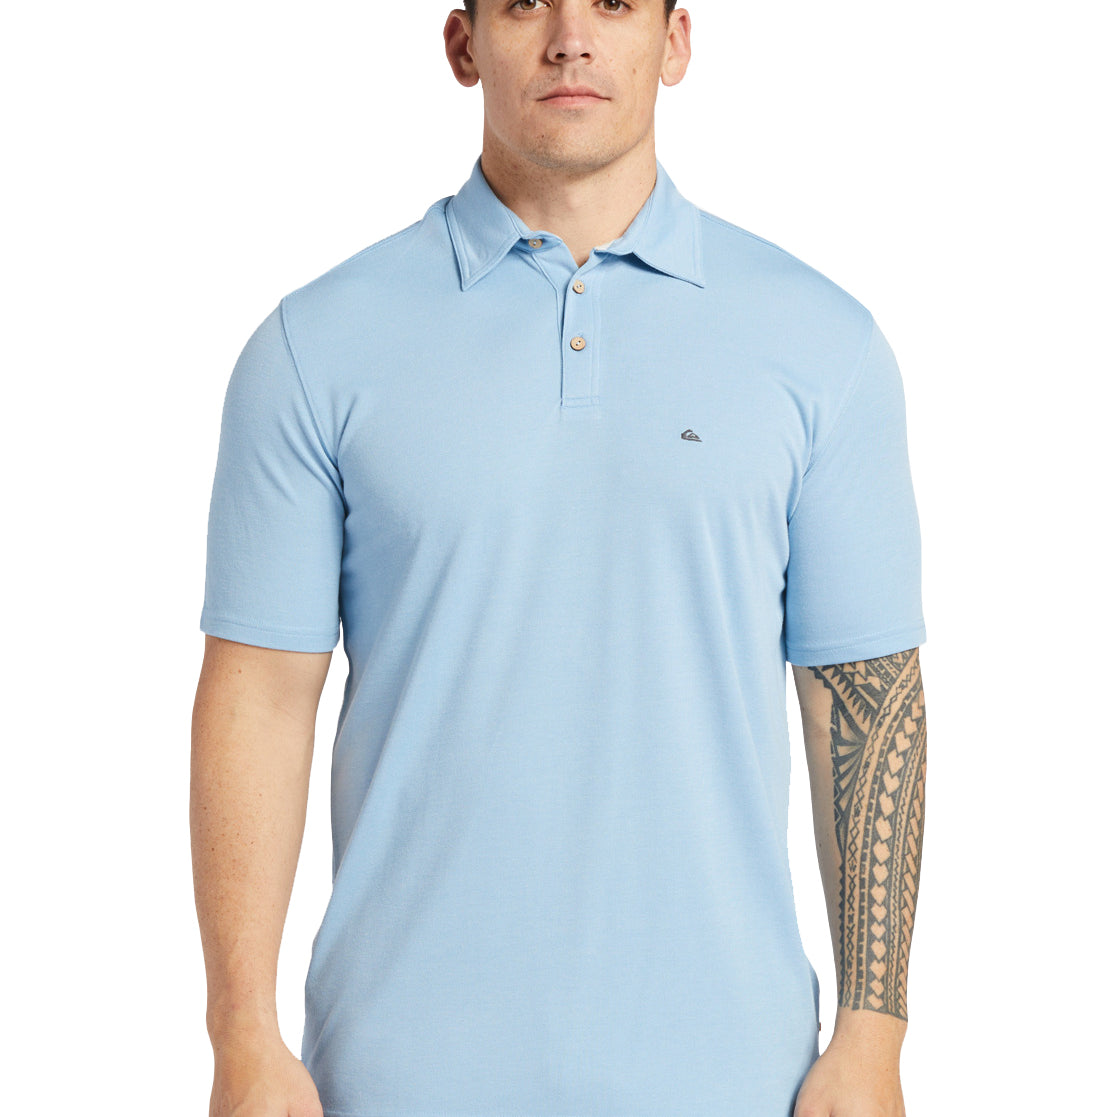 Quiksilver Waterman Waterpolo SS Polo Shirt BHC0 S